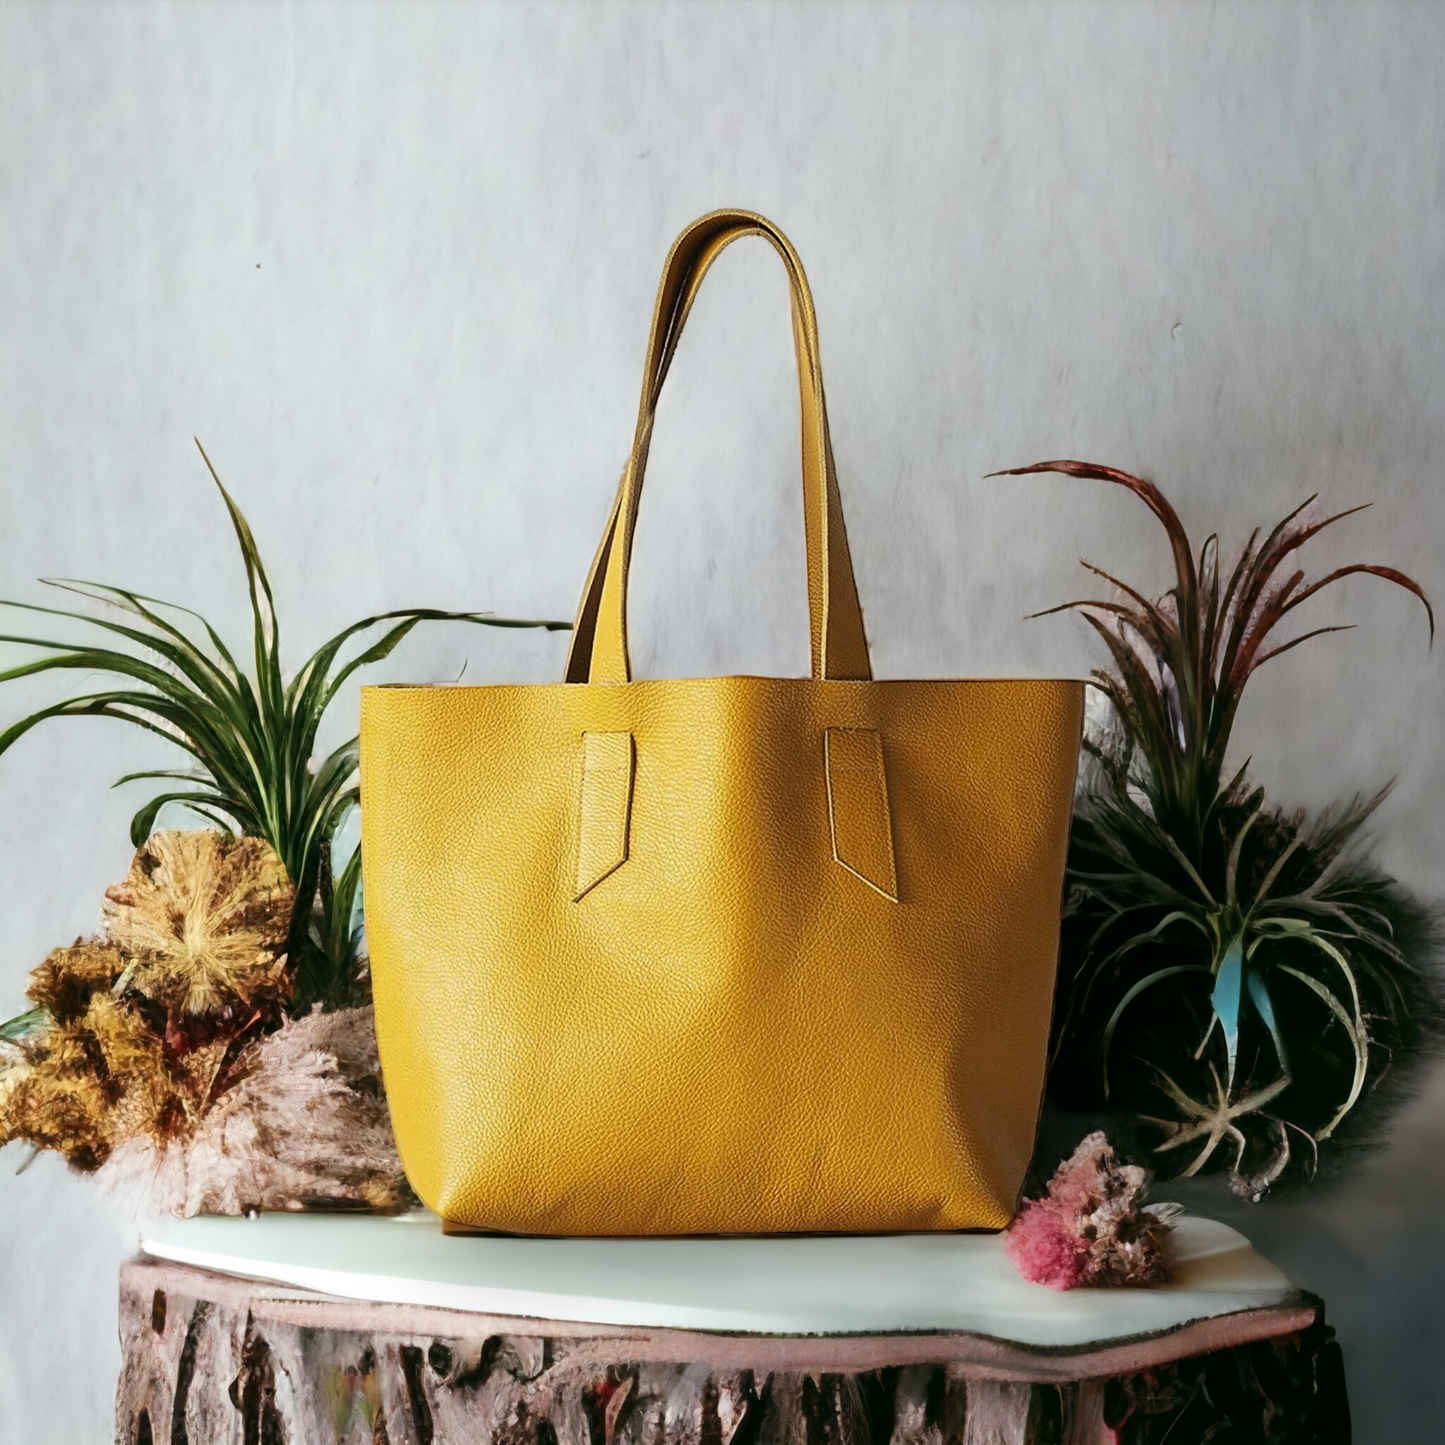 Yellow Leather Tote Bag for Women Raw Edge Shopper Purse Unlined Bag Leather Shoulder Bag Large Marketing Bag Everyday Tote Bag Large